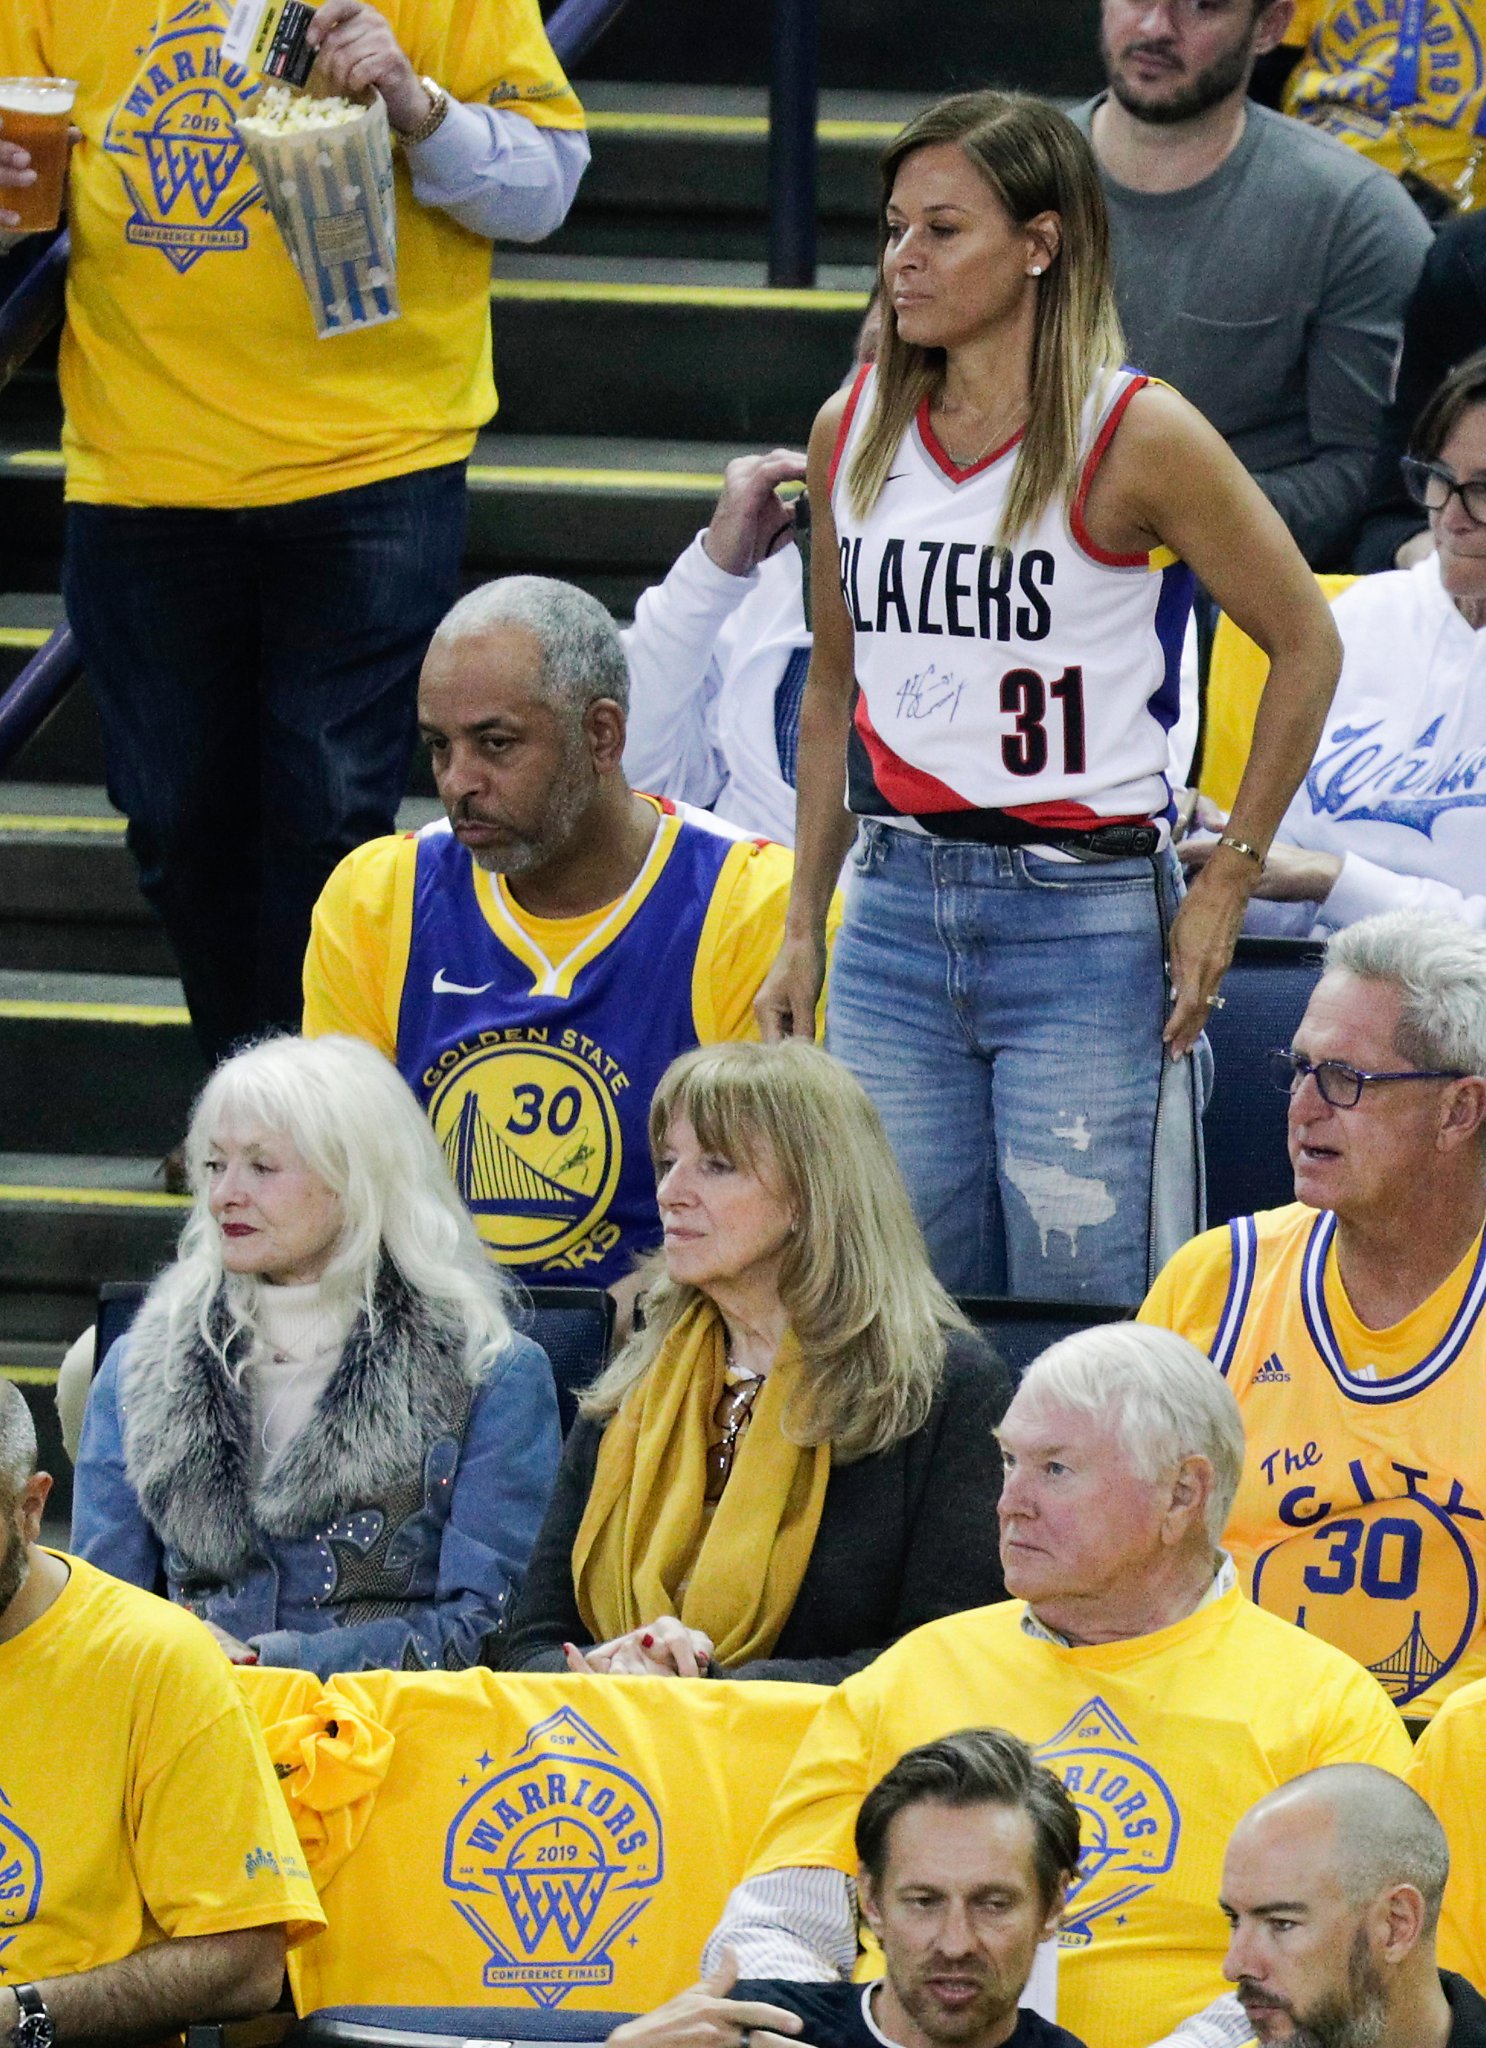 Dell And Sonya Curry Switch Split Jerseys After Steph Asks Who You With